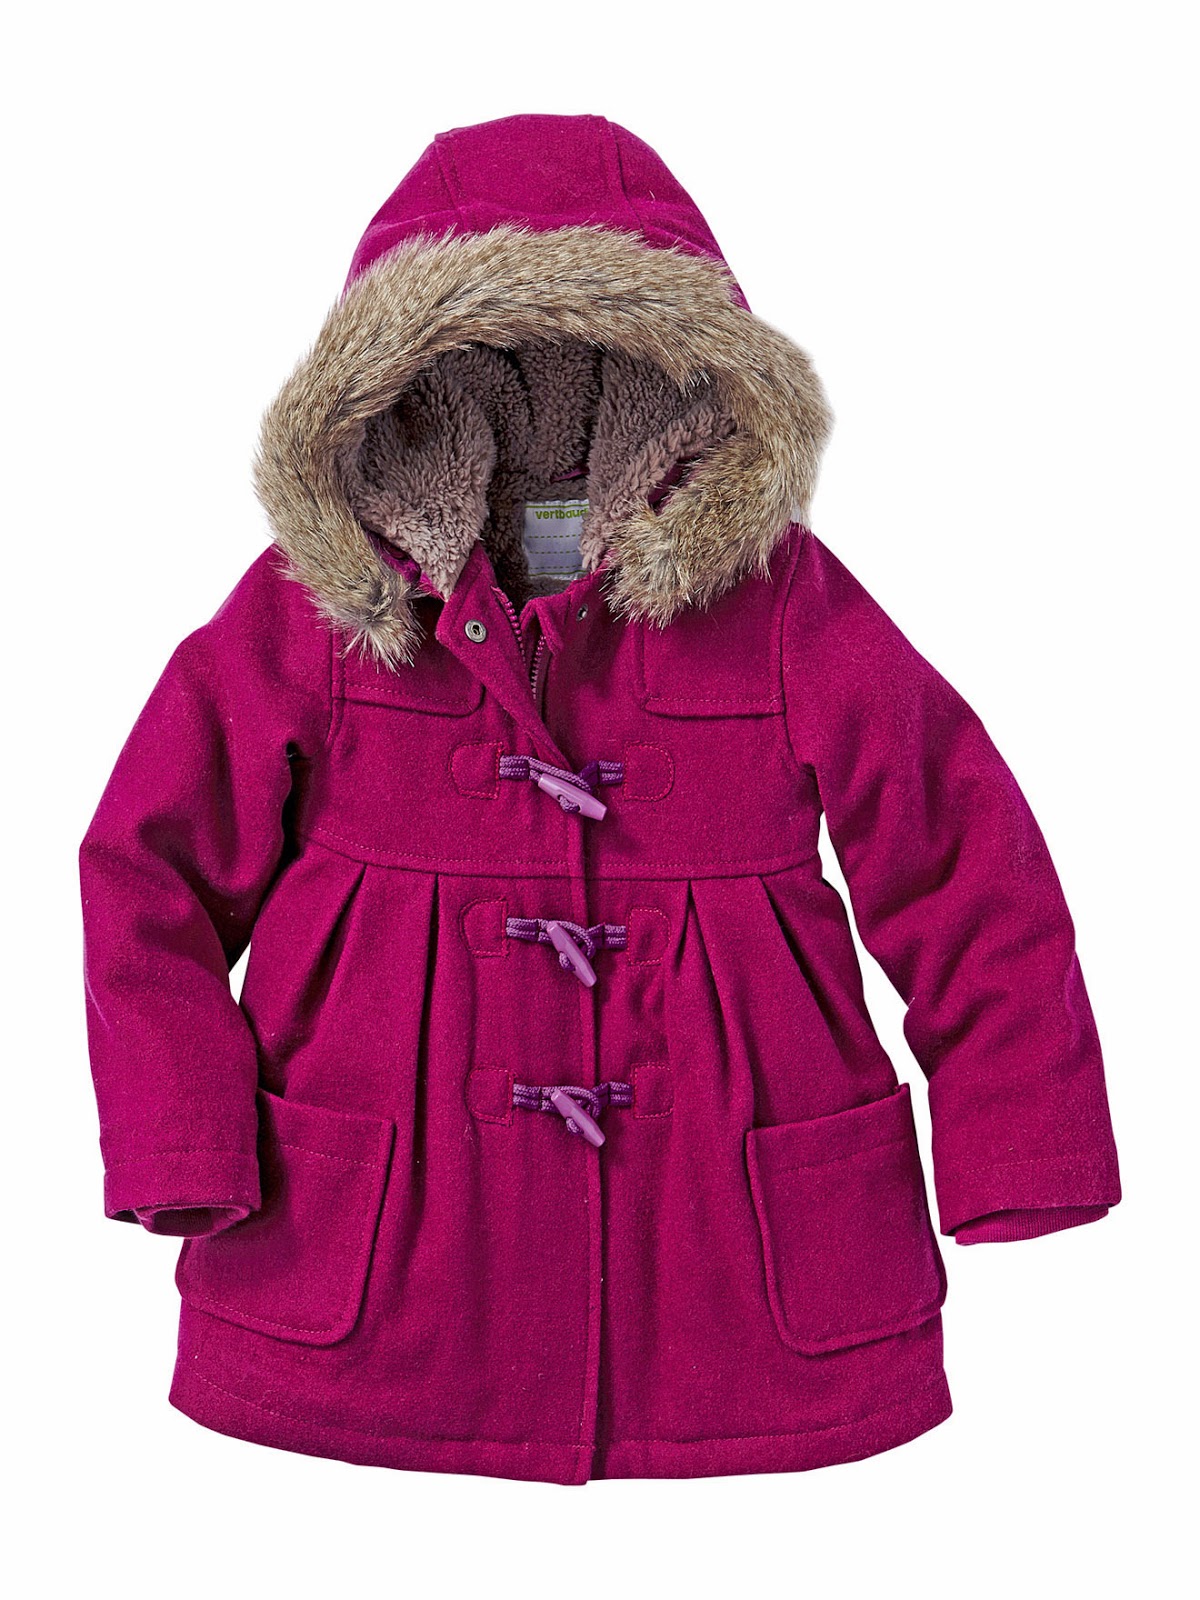 Girl's Hooded Duffle Coat - Fashion Baby Stories